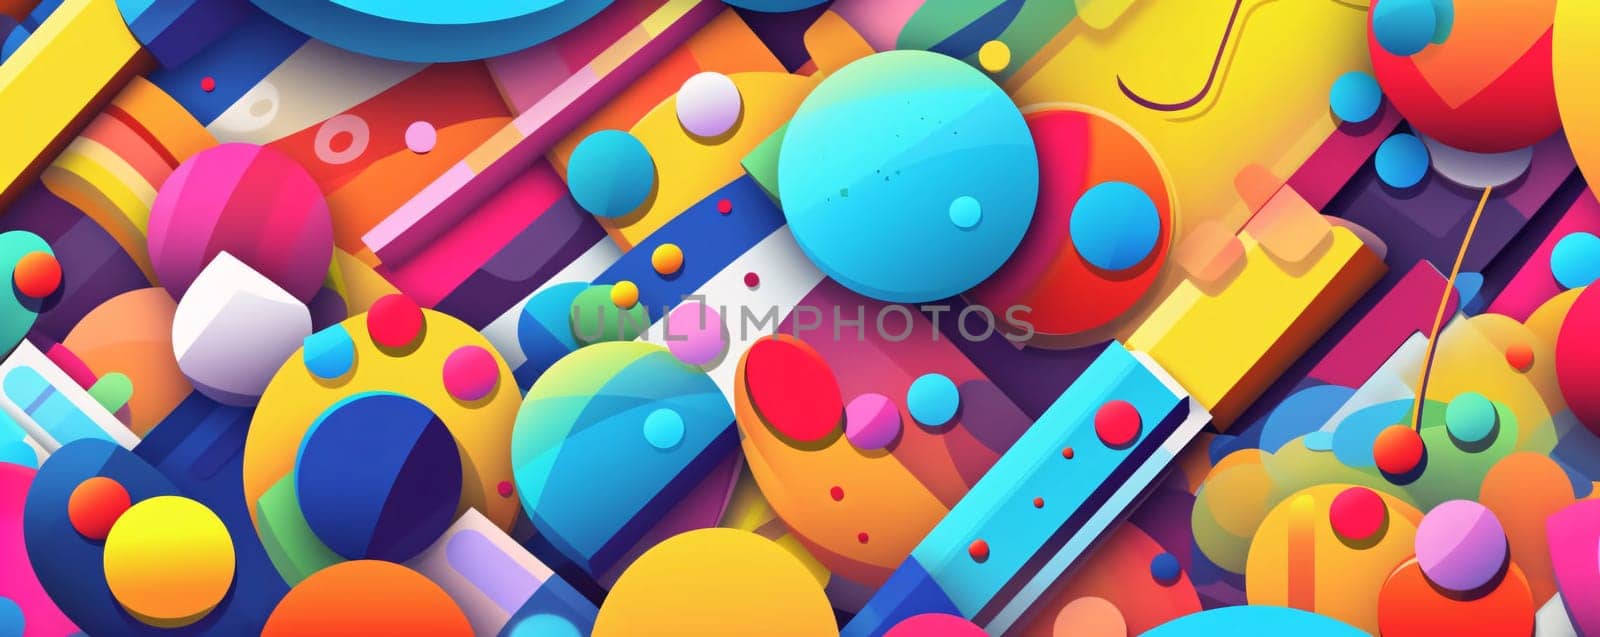 Colorful abstract background with circles and dots. Vector illustration for your design by ThemesS